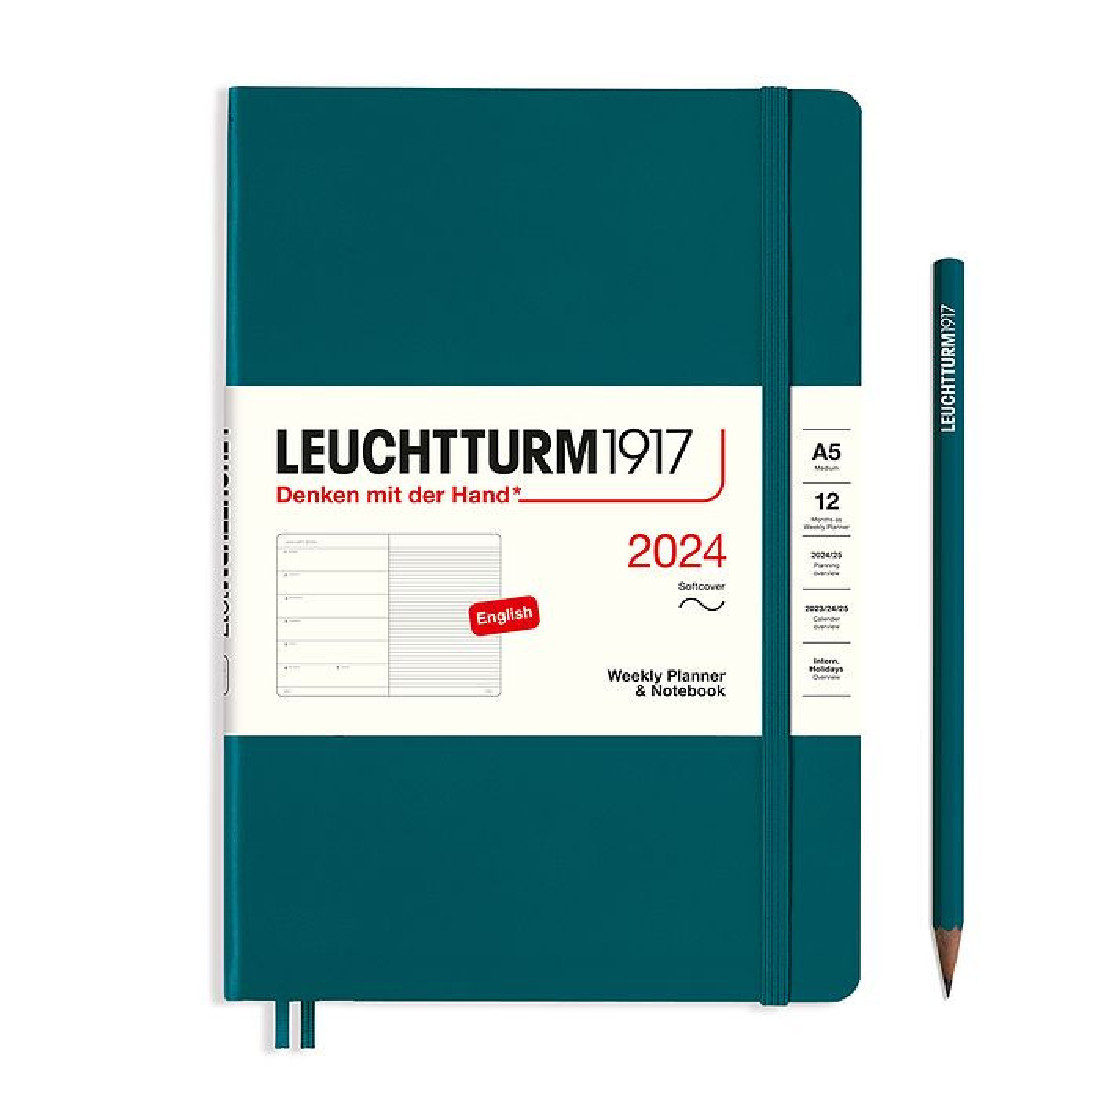 Leuchtturm 1917 Weekly Planner and Notebook 2024 Pacific Green Medium A5 Soft Cover